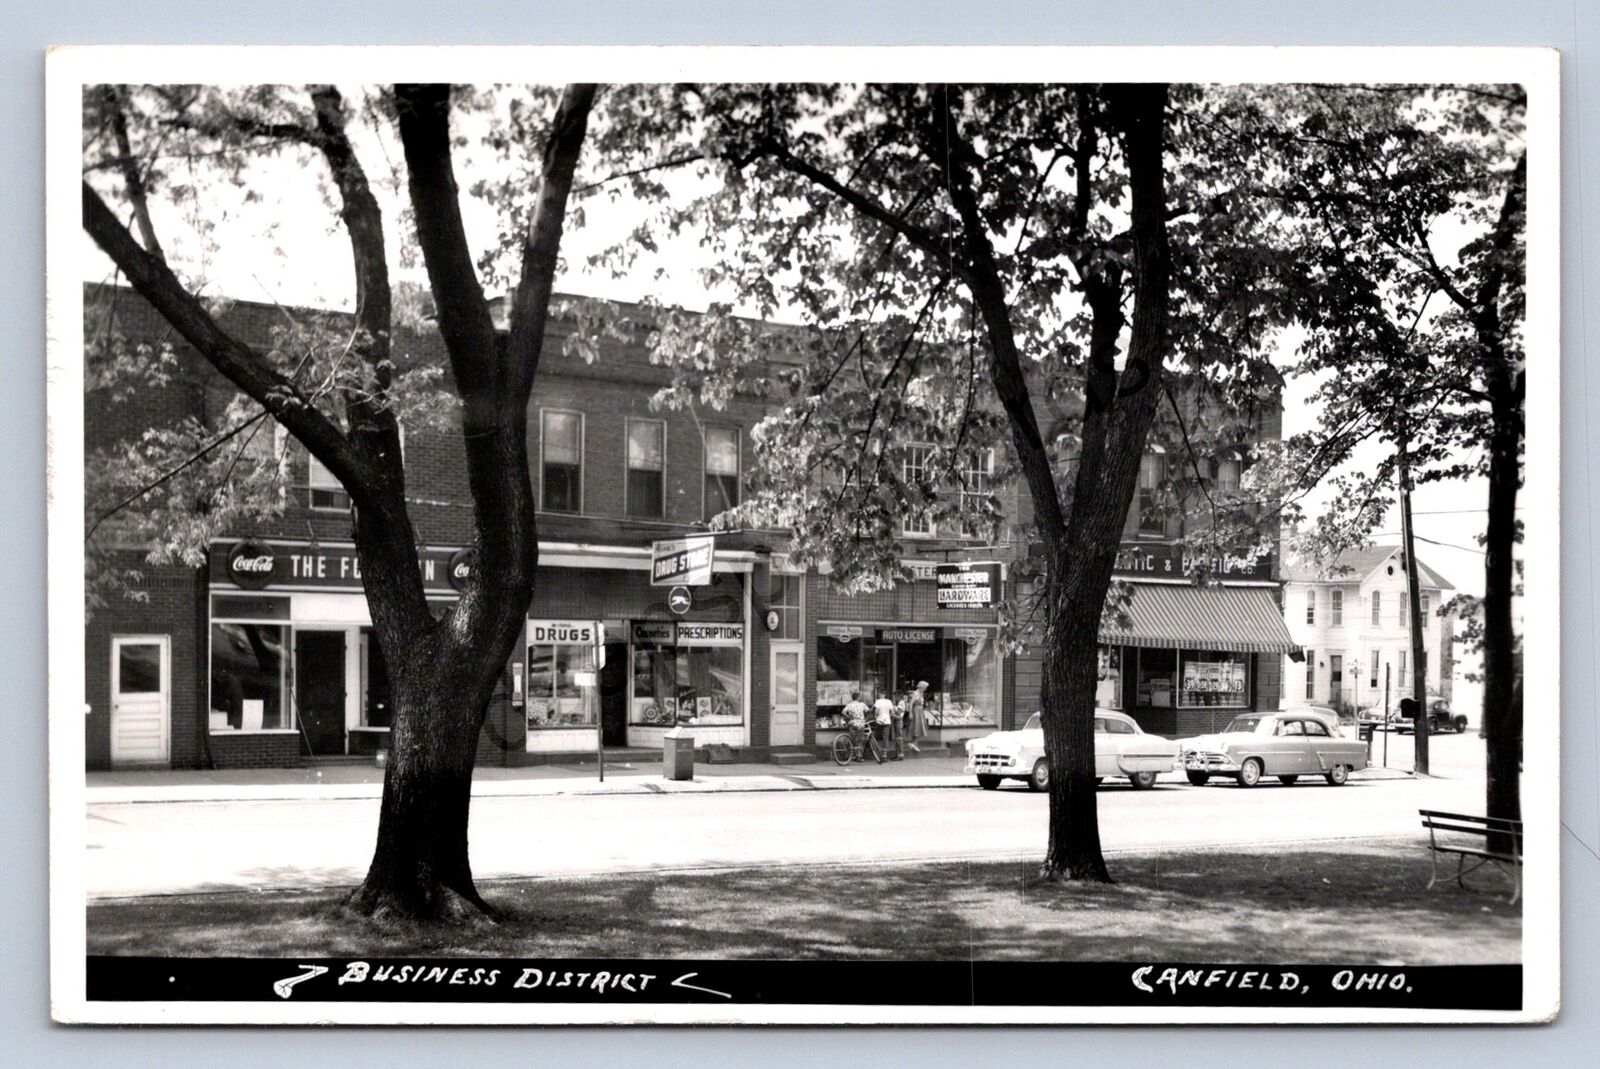 J87/ Canfield Ohio RPPC Postcard c1950s Mahoning Business District 1477